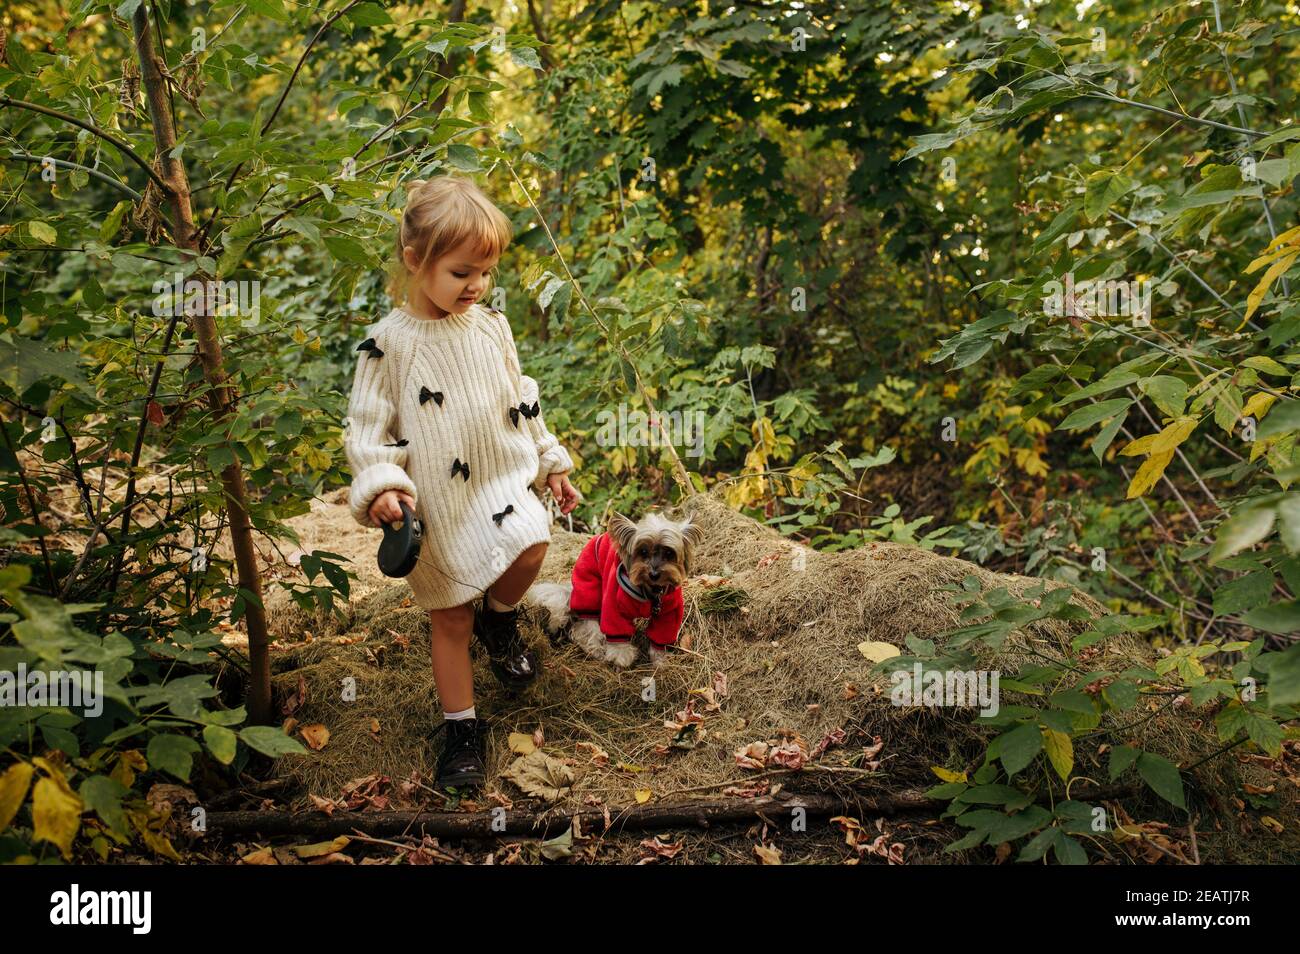 Kid with funny doggy walking in the garden Stock Photo